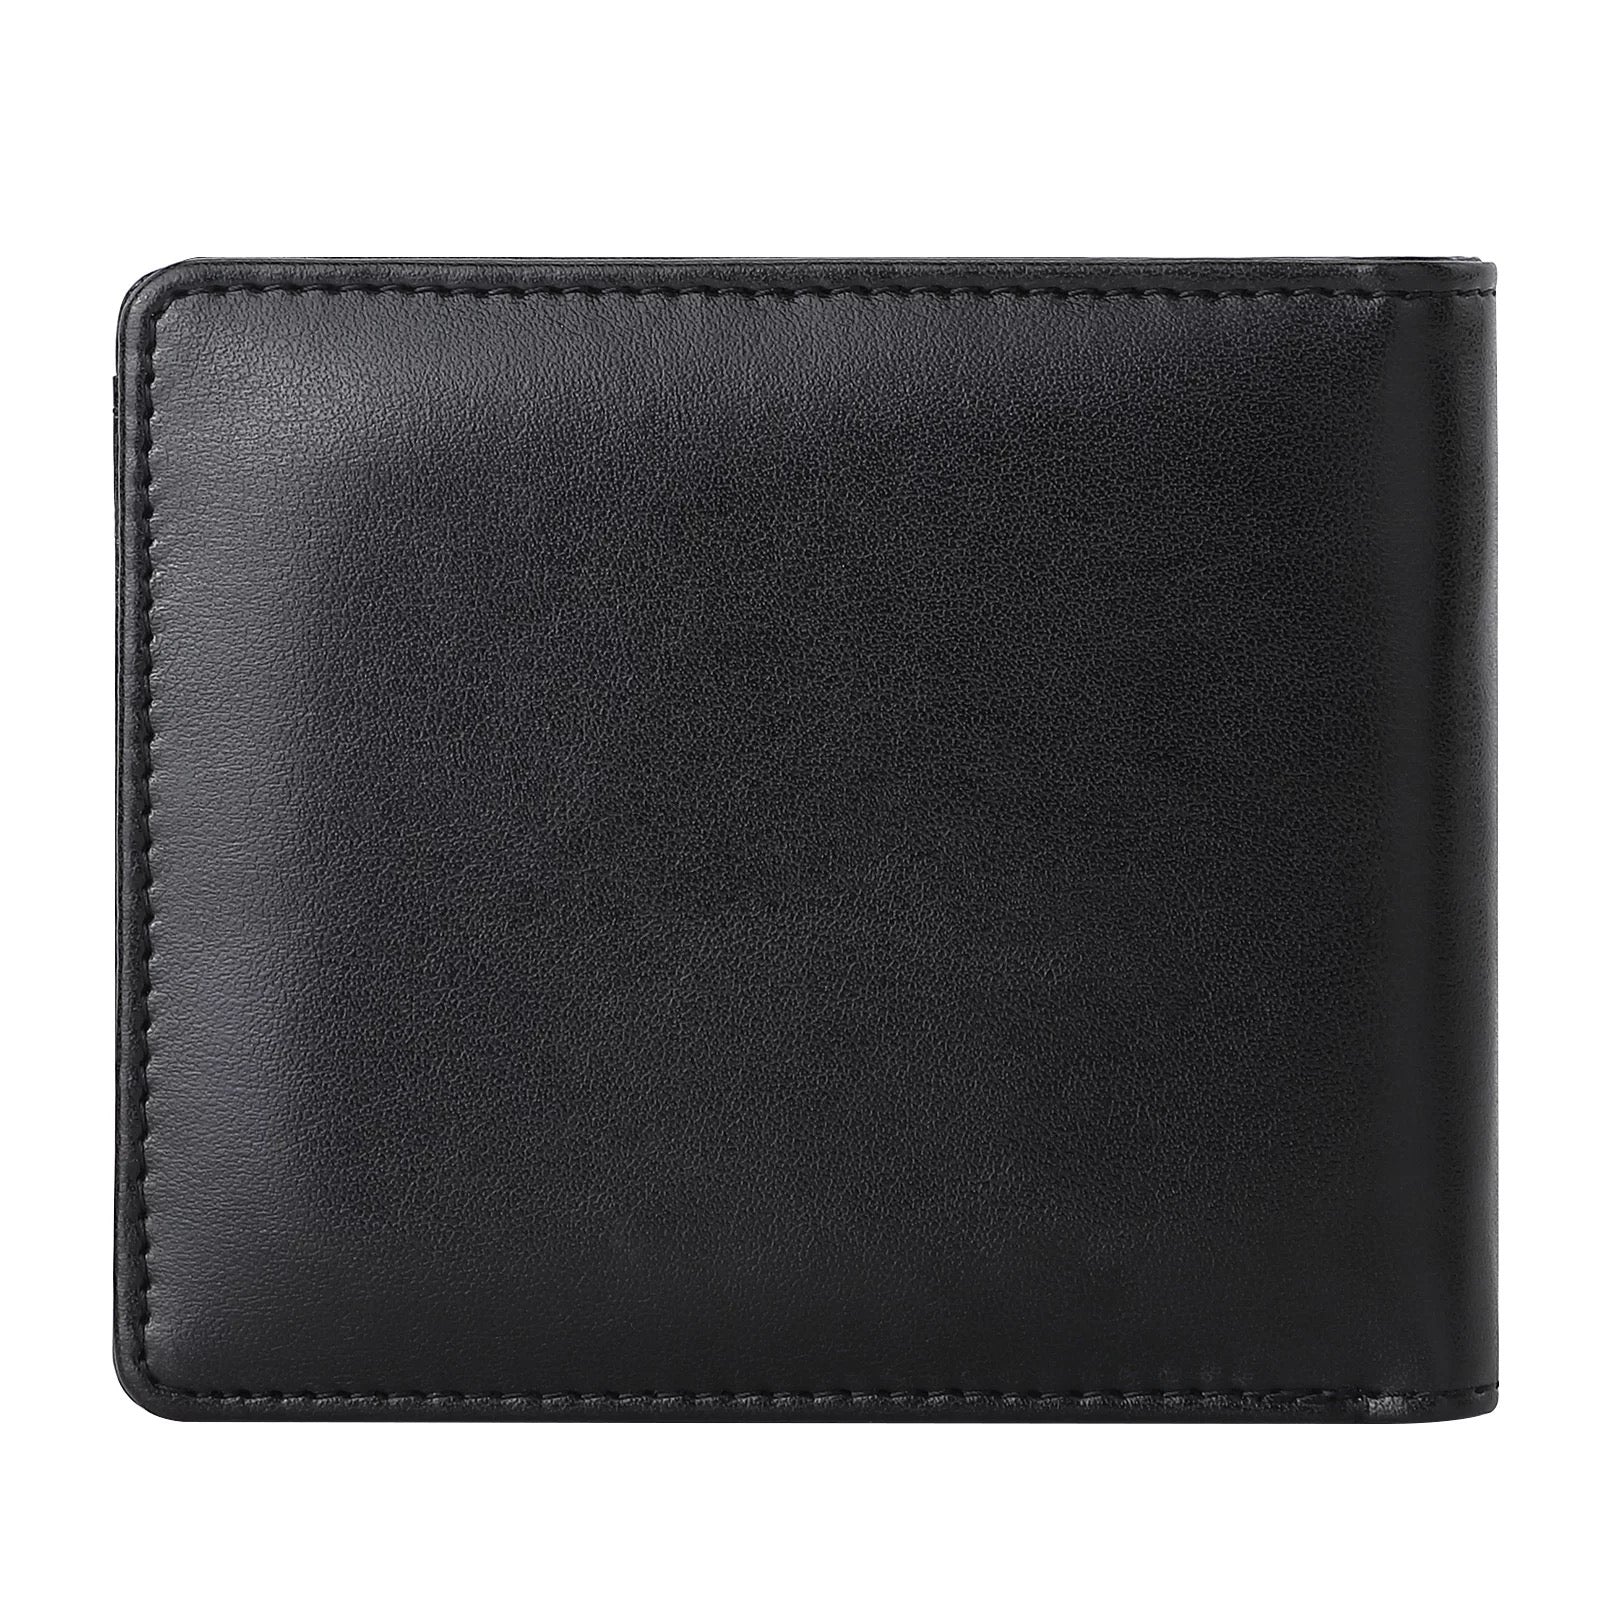 Fedex Sublimation Wallet Press: DIY Customized PU Leather Money Bag. Best  For Mens Wallets & Purses. From Hc_network002, $2.93